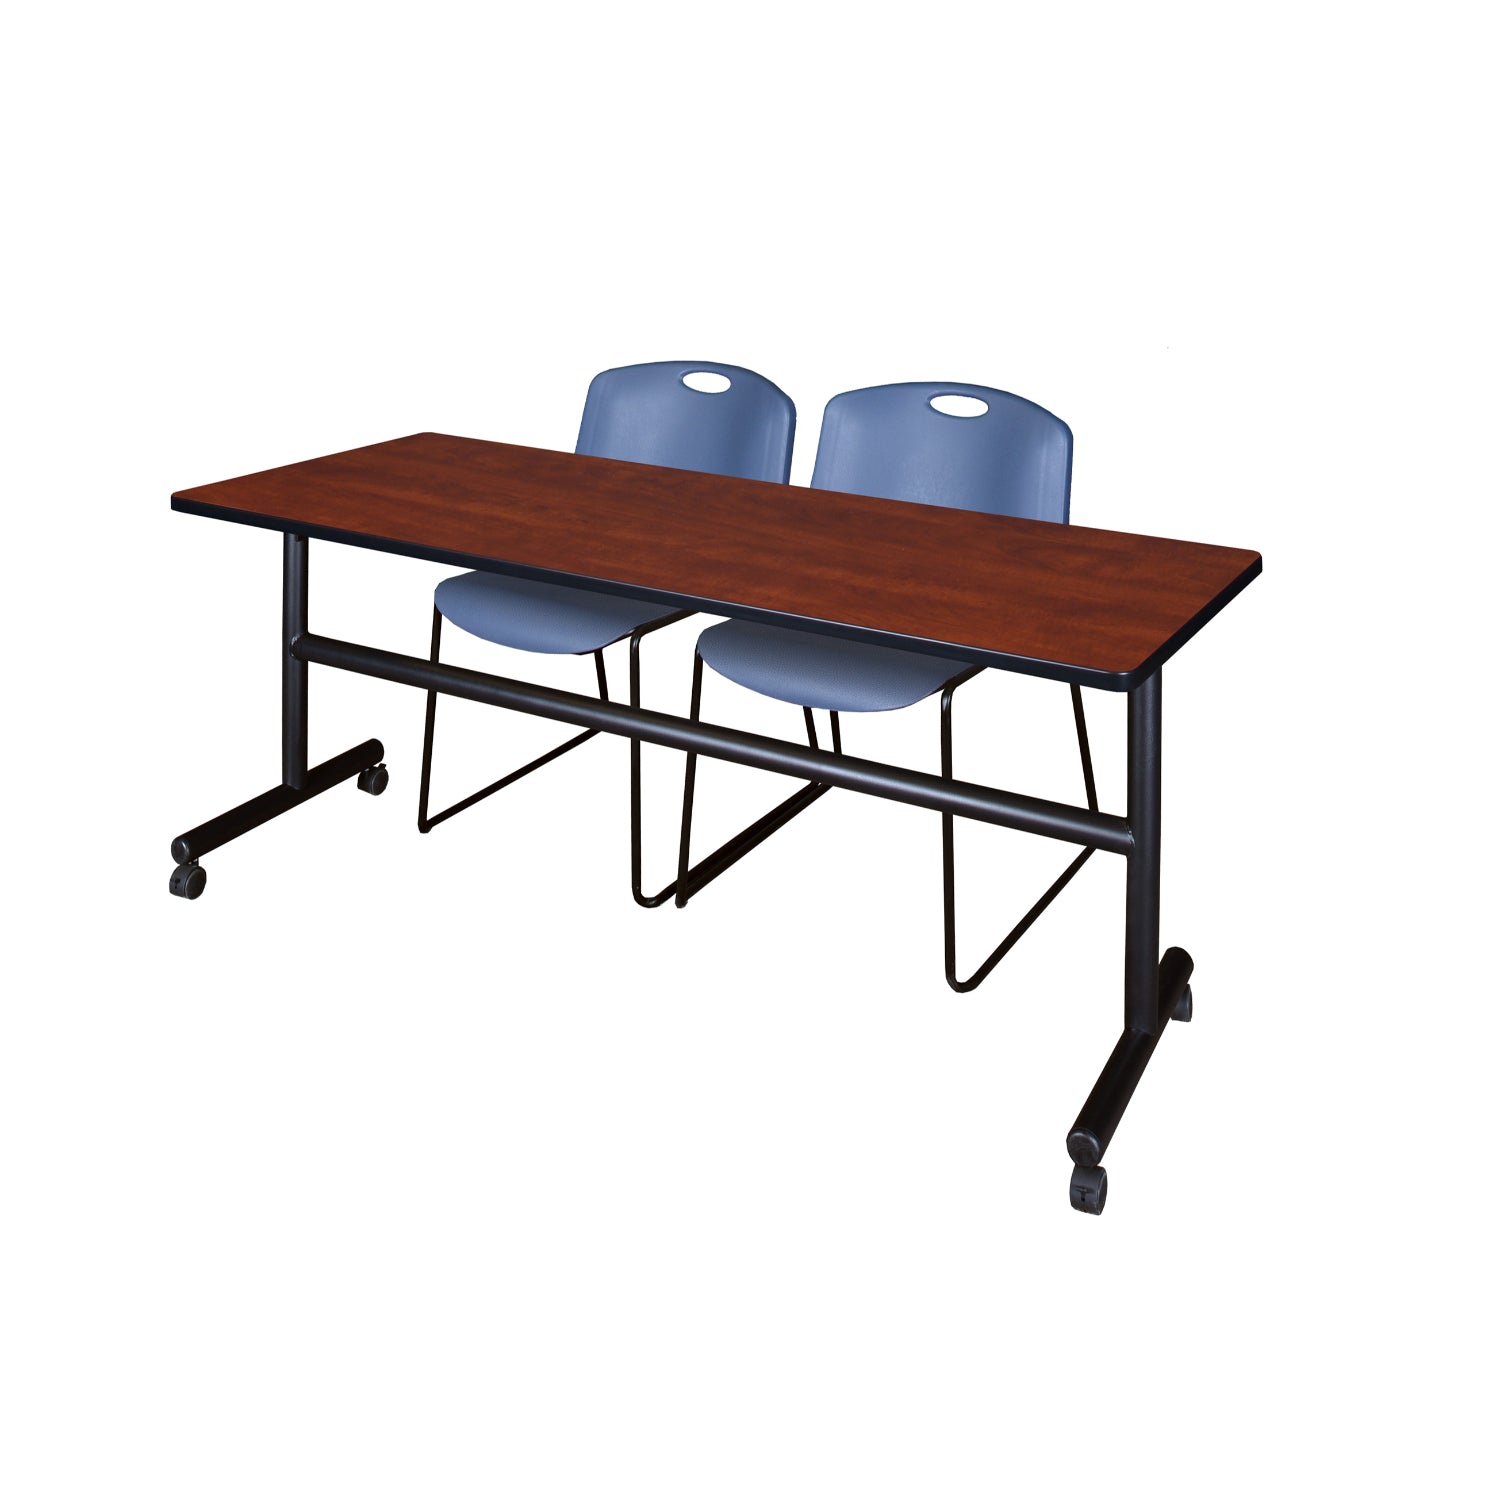 Kobe Flip Top Training Table and Chair Package, Kobe 72" x 24" Flip Top Mobile Nesting Table with 2 Zeng Stack Chairs